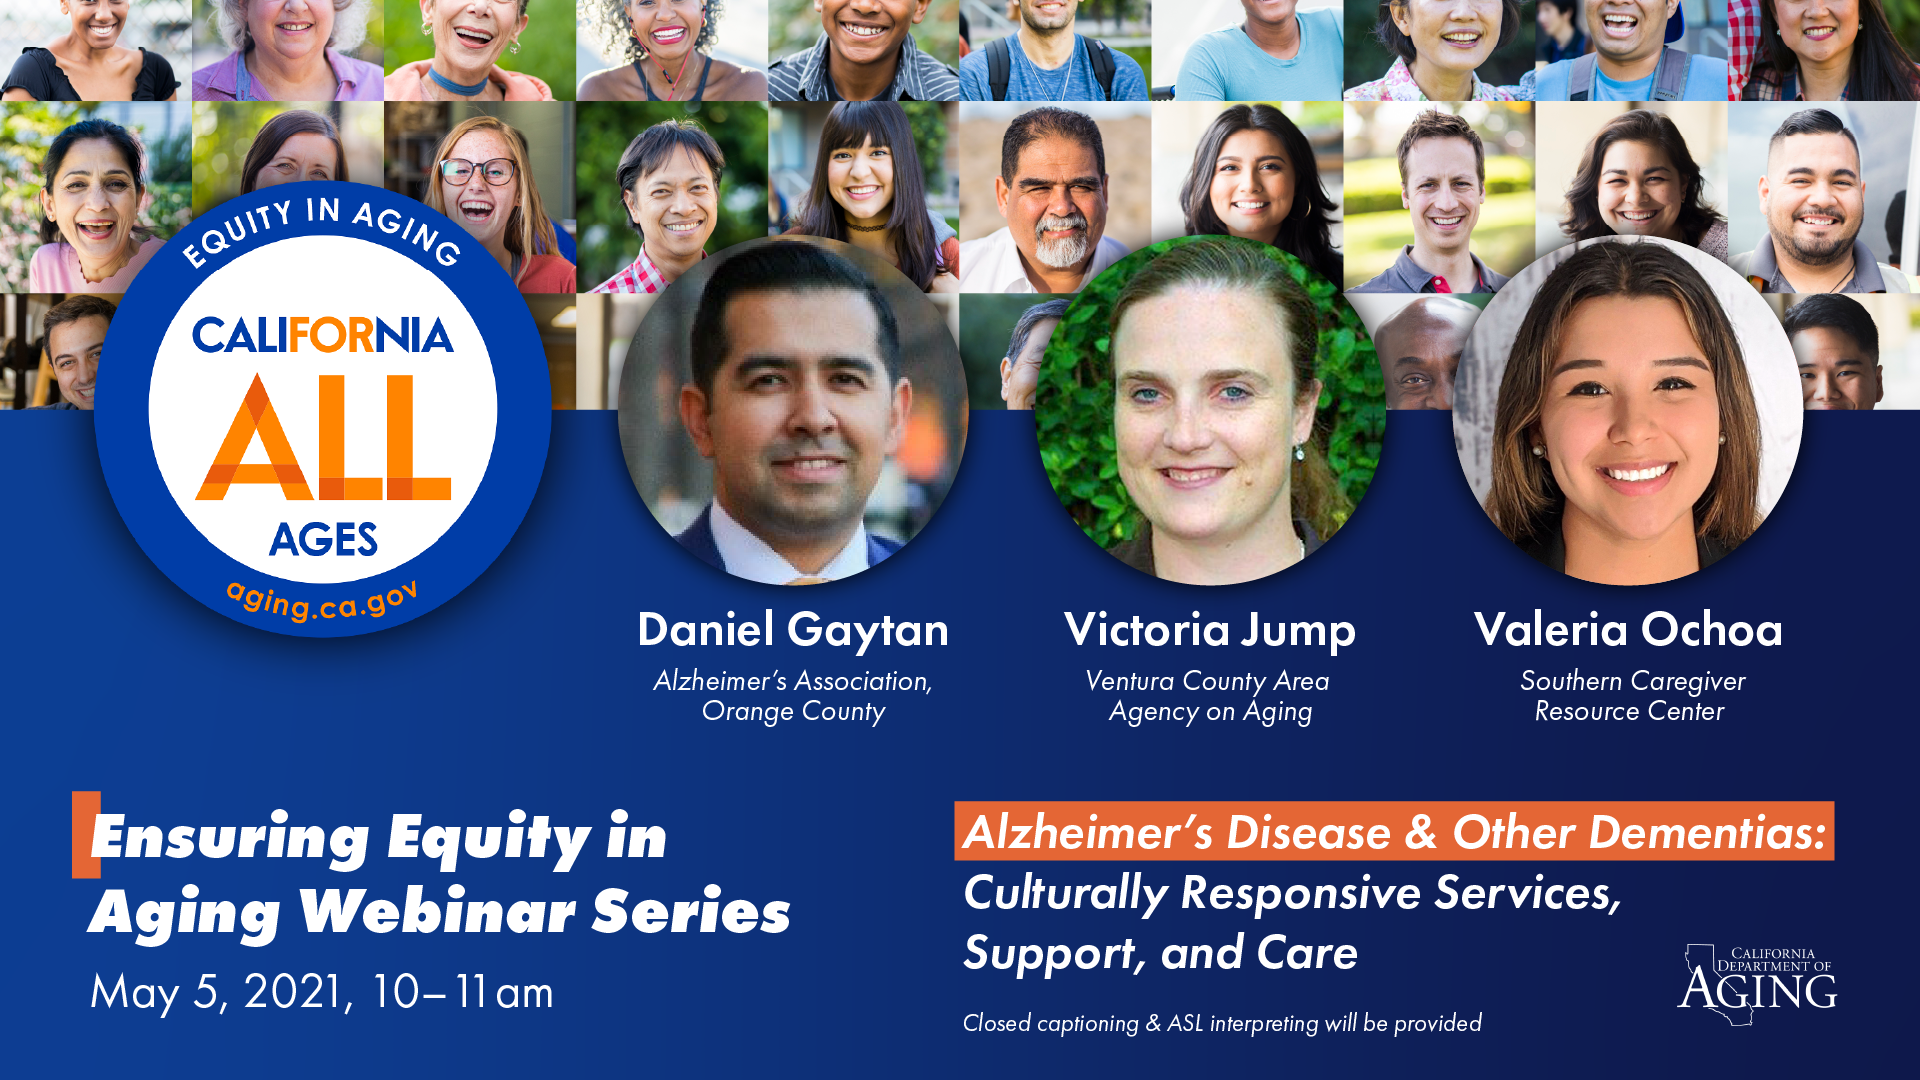 On May 5th, CDA will host our seventh Ensuring Equity in Aging webinar: Alzheimer’s Disease & Other Dementias: Culturally Responsive Services, Support, and Care. Our panelists will share resources and best practices for ensuring that patients and clients, as well as their loved ones and caregivers, receive culturally responsive and sensitive support and care. This webinar will feature Daniel Gaytan (Alzheimer's Association, Orange County), Victoria Jump (Ventura County Area Agency on Aging), Valeria Ochoa (Southern Caregiver Resource Center)